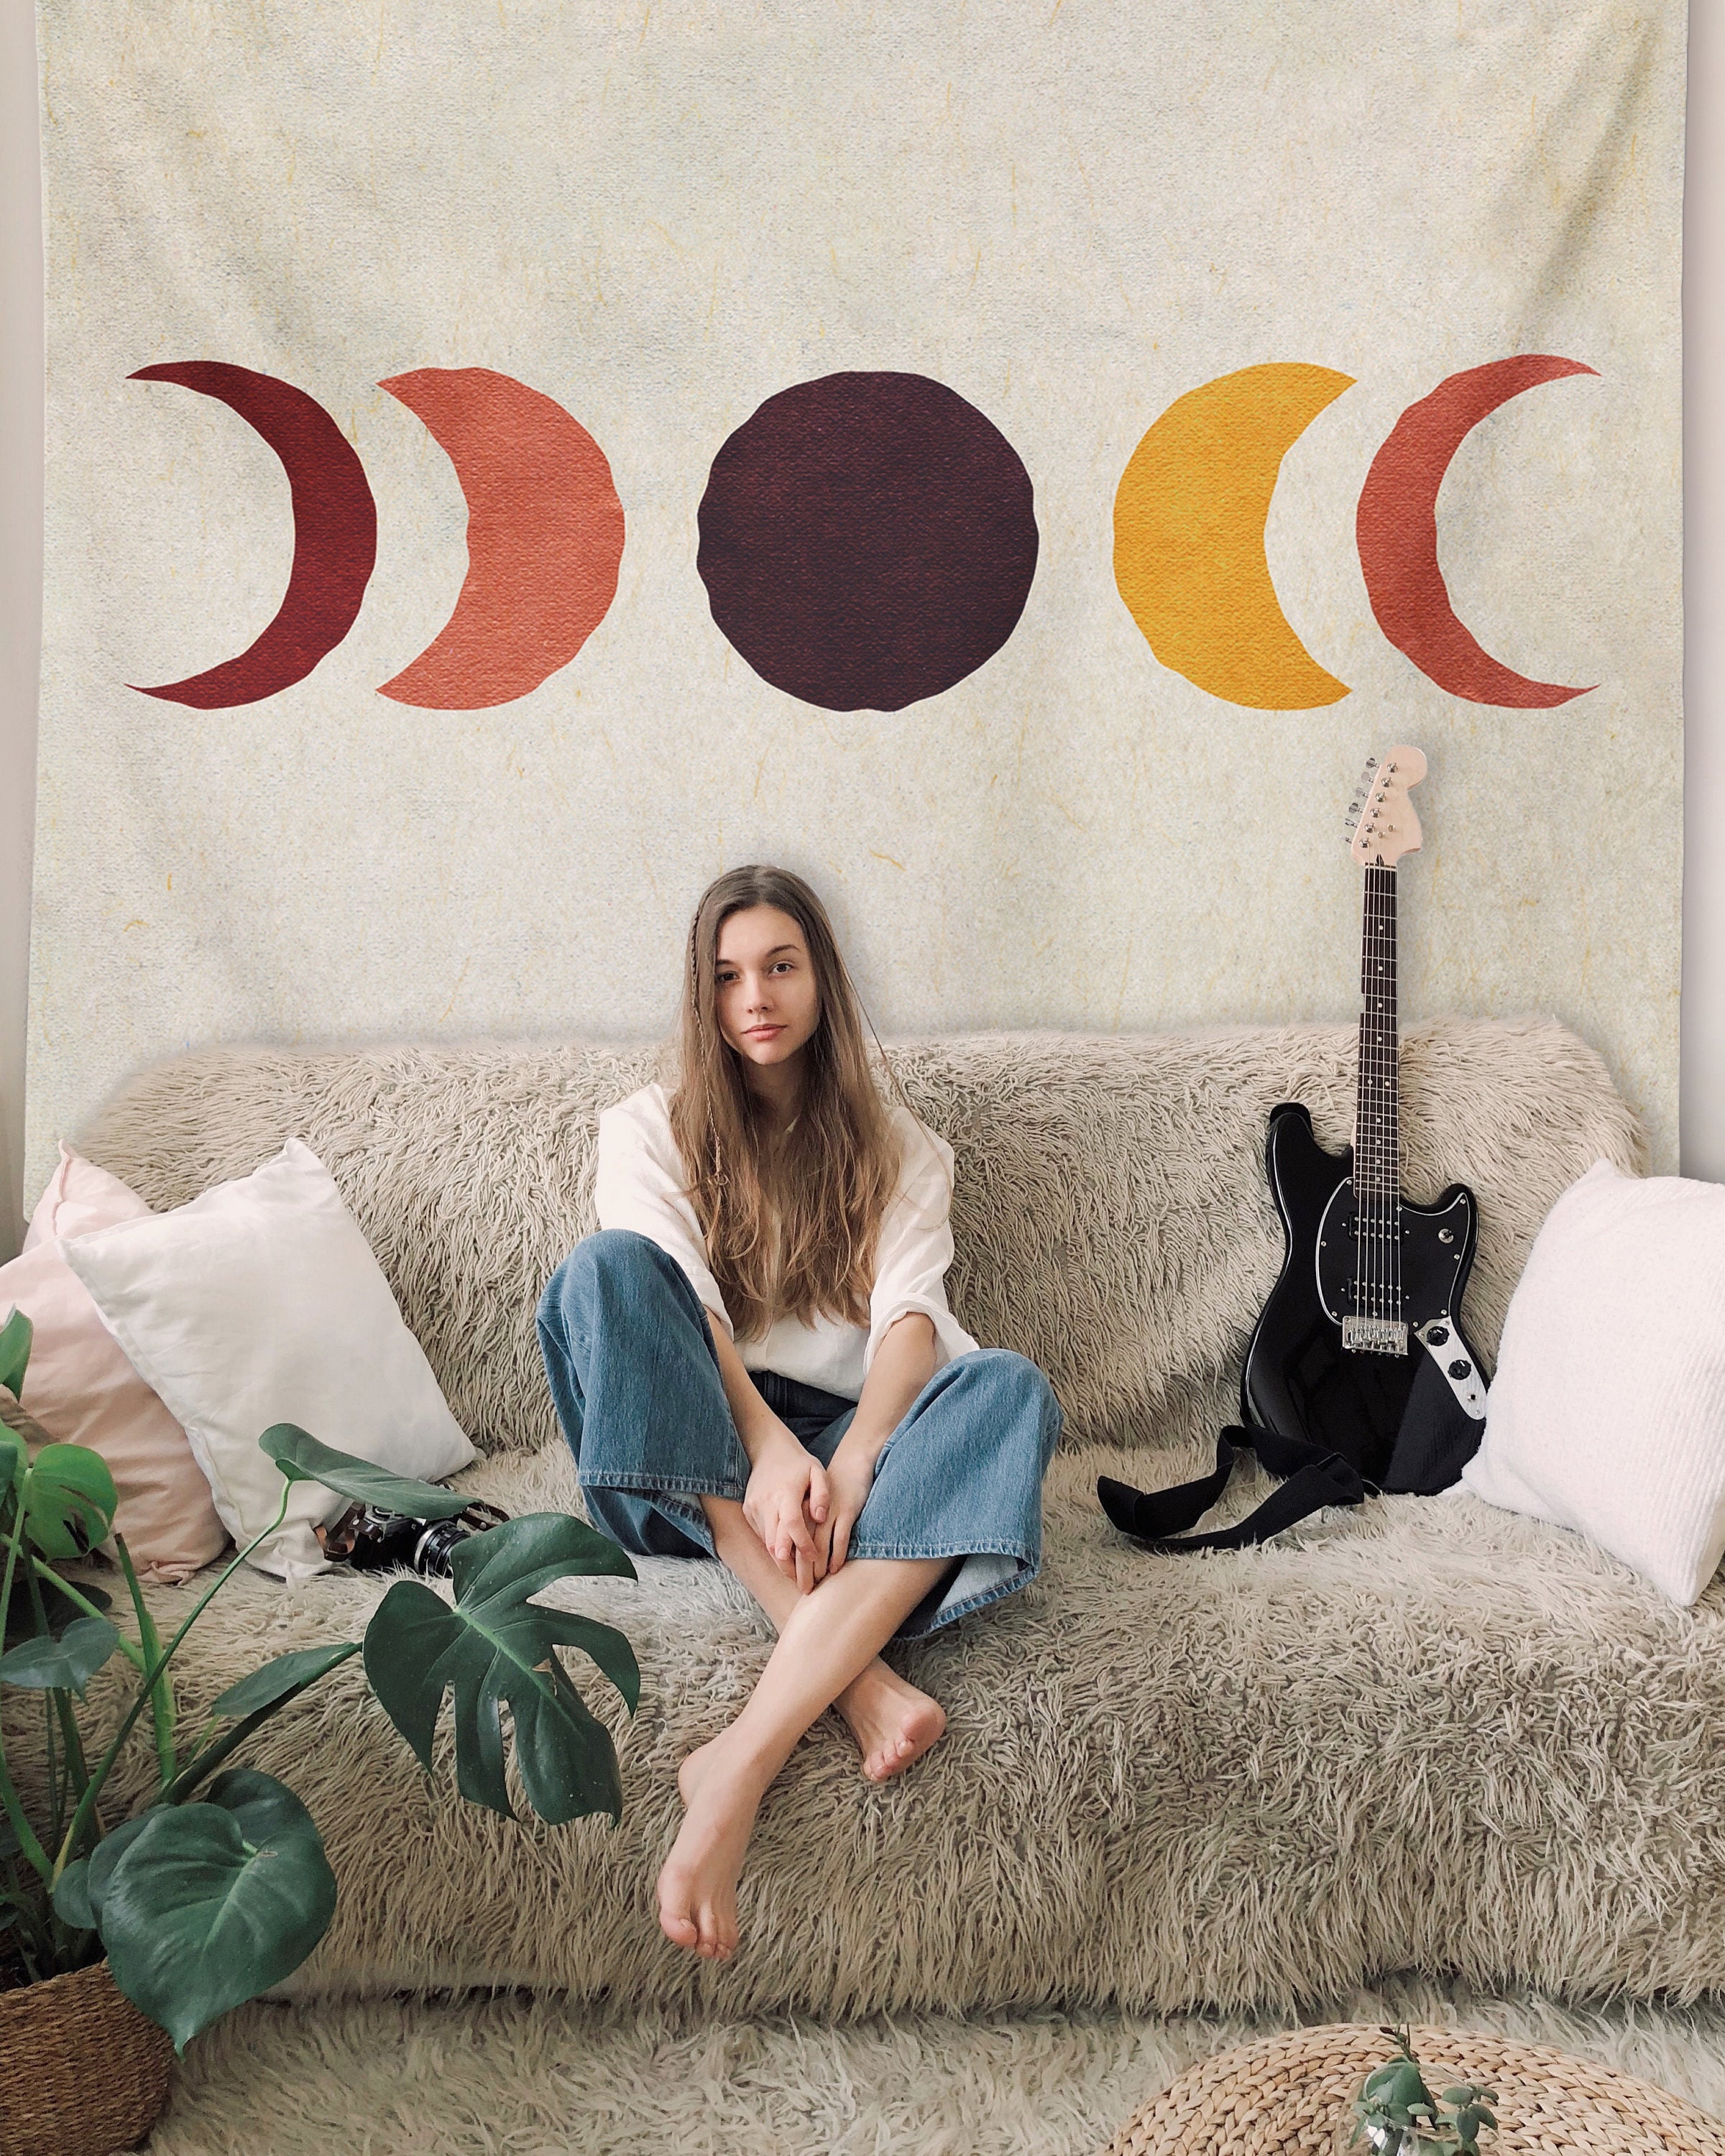 Floral Triple Moon Phases Tapestry - Shop Online on roomtery